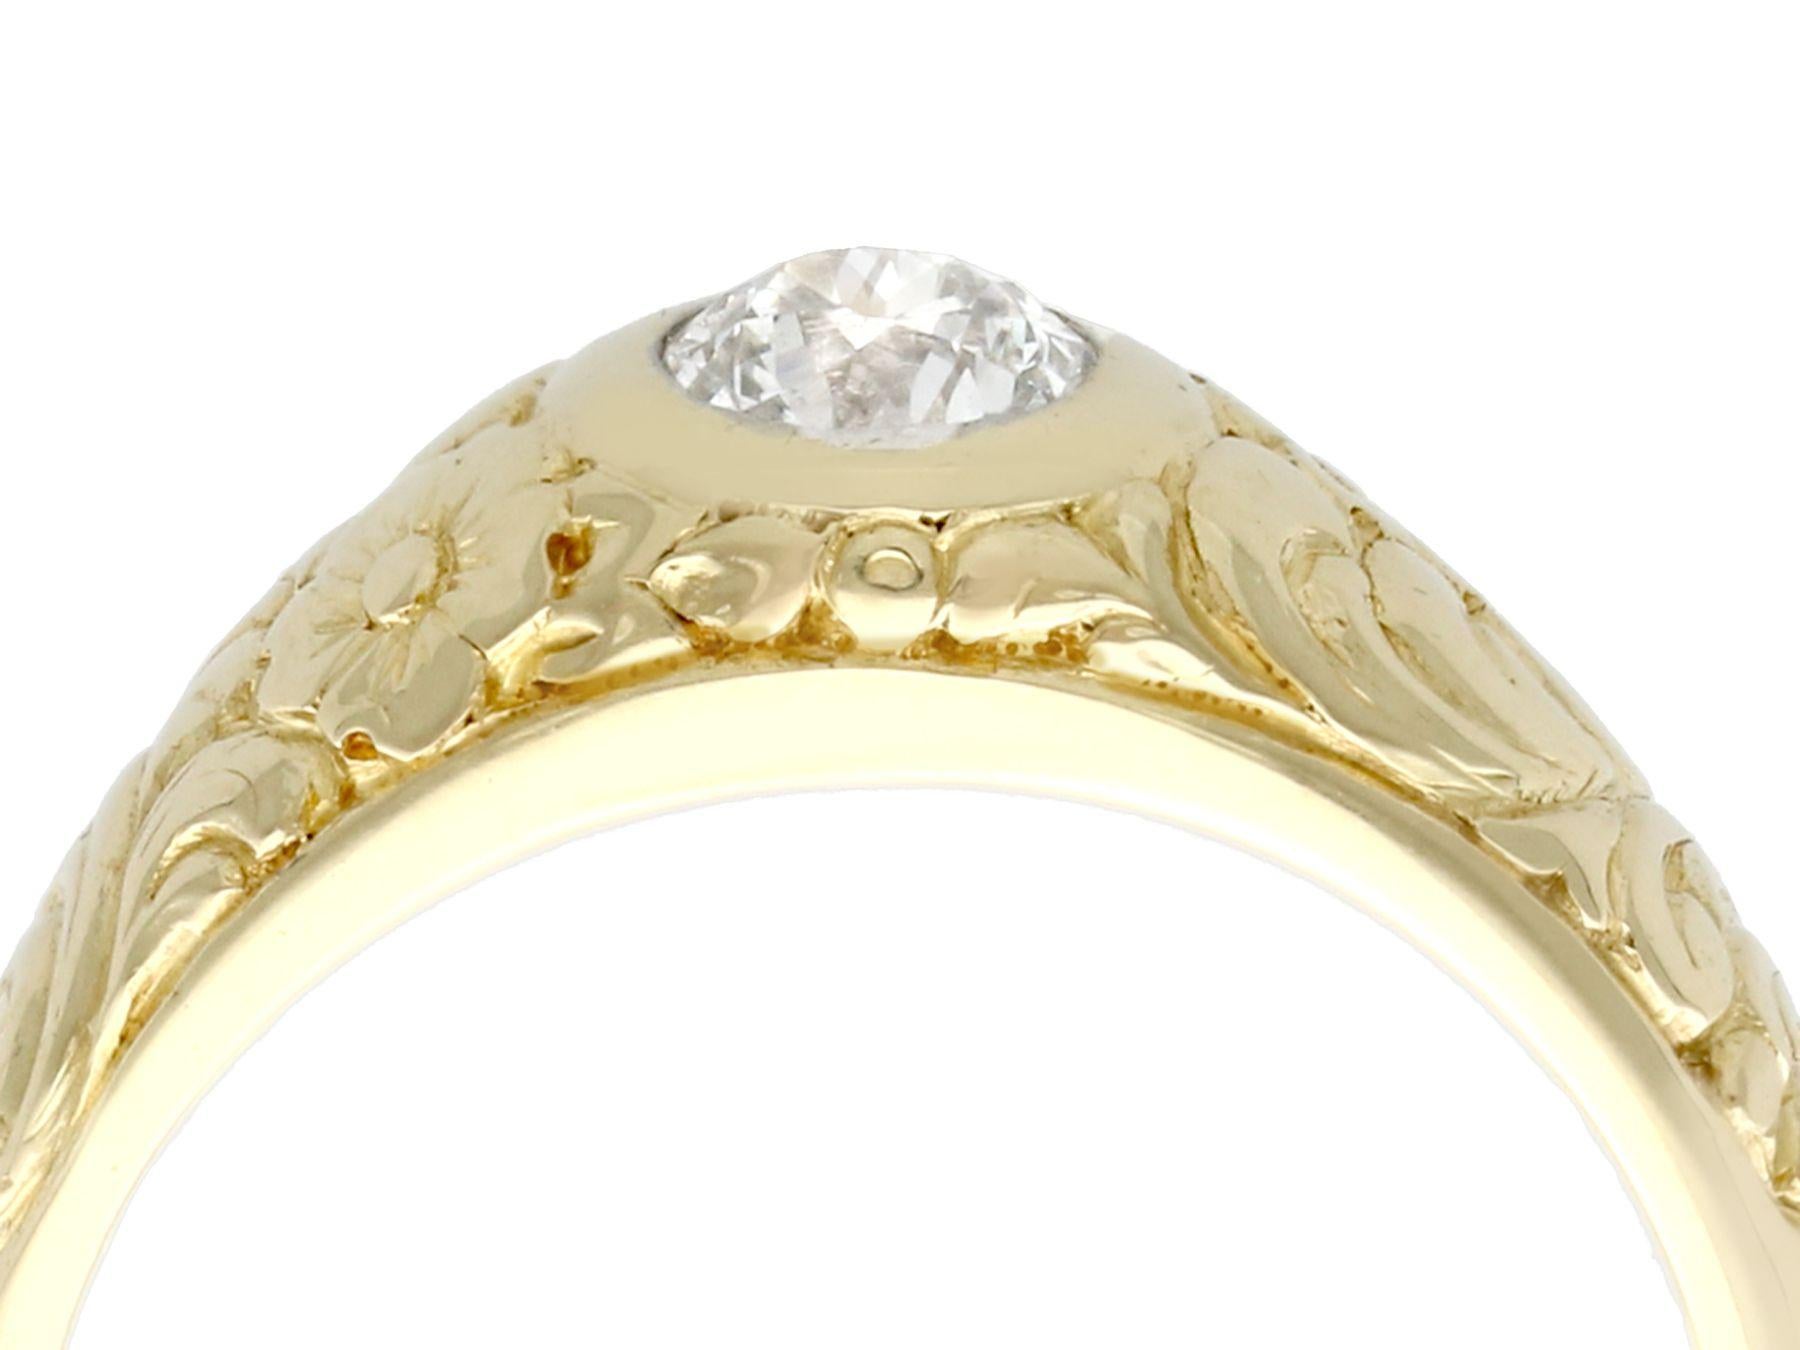 A fine and impressive antique 1930s 0.42 carat diamond and 14k yellow gold solitaire ring; part of our diverse antique estate jewelry collections.

This fine and impressive antique unisex gold and diamond ring has been crafted in 14k yellow